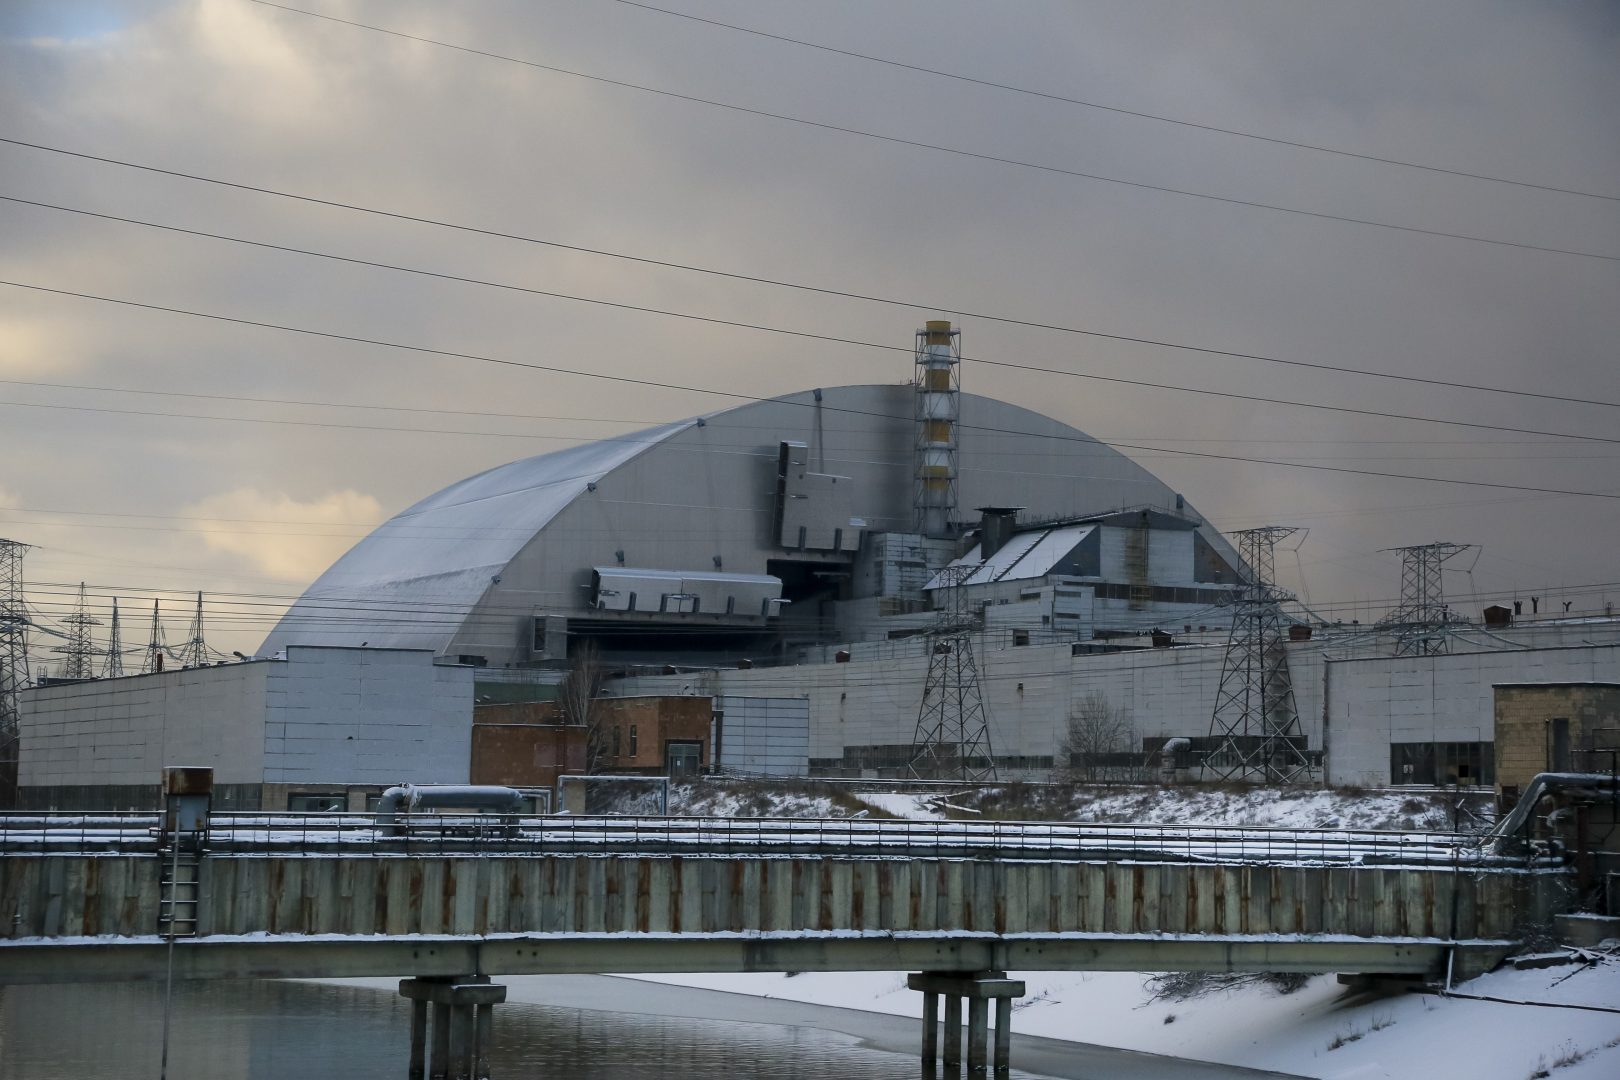 A new shelter is installed over the exploded reactor at the Chernobyl nuclear plant, Chernobyl, Ukraine, Tuesday, Nov. 29, 2016. A massive shelter has finally been installed over the exploded reactor at the Chernobyl nuclear plant, one of the most ambitious engineering projects in the world. (AP Photo/Efrem Lukatsky)